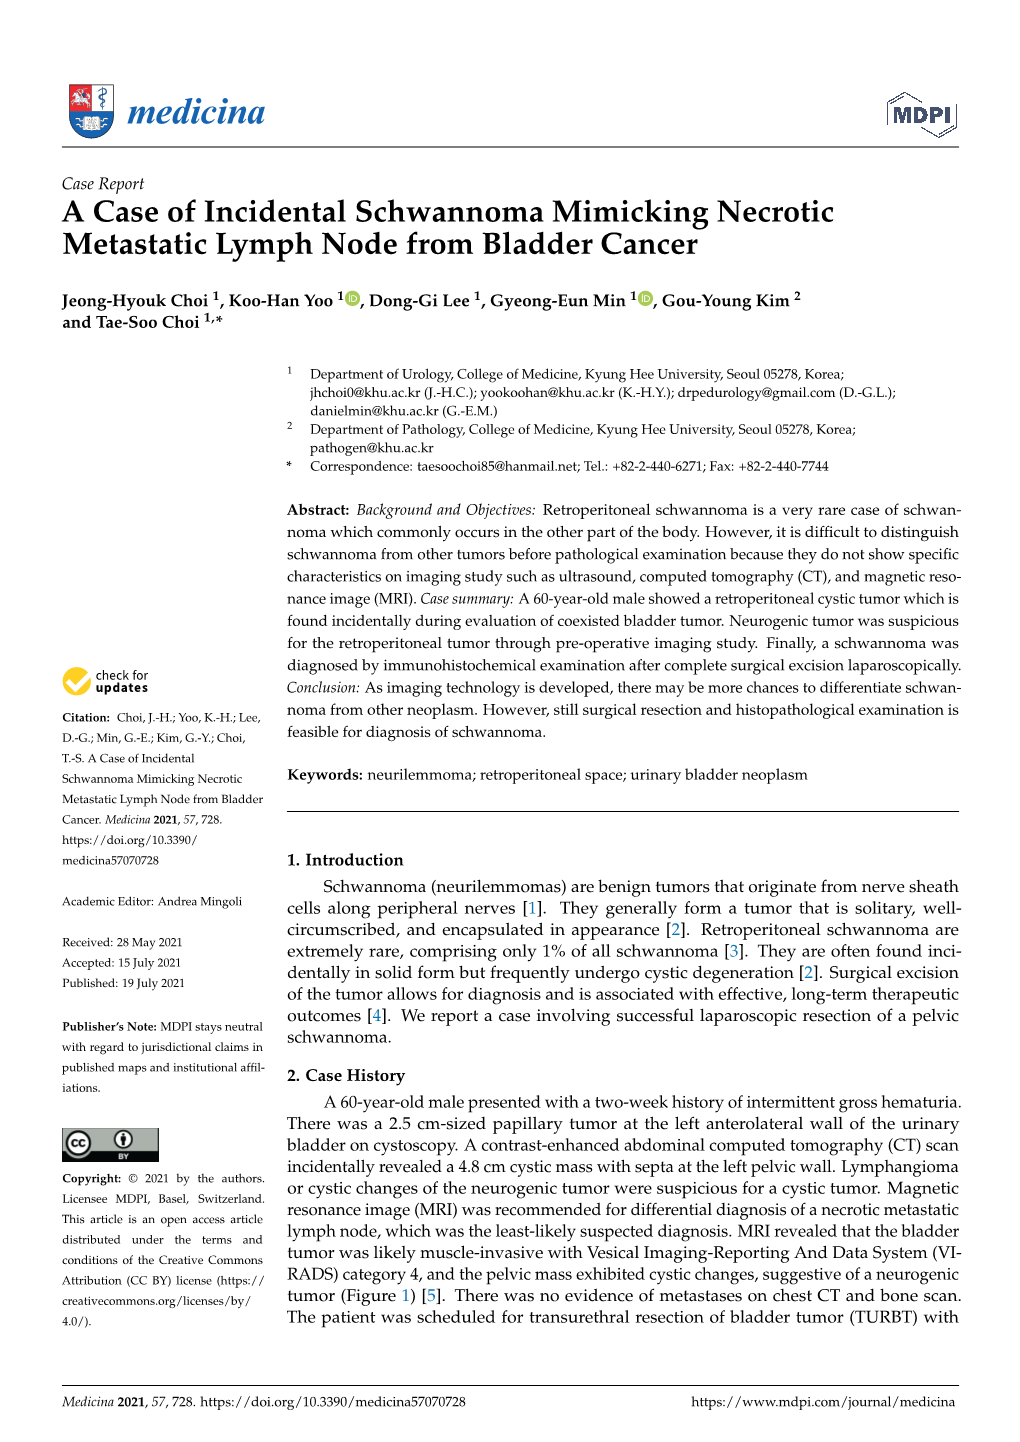 A Case of Incidental Schwannoma Mimicking Necrotic Metastatic Lymph Node from Bladder Cancer